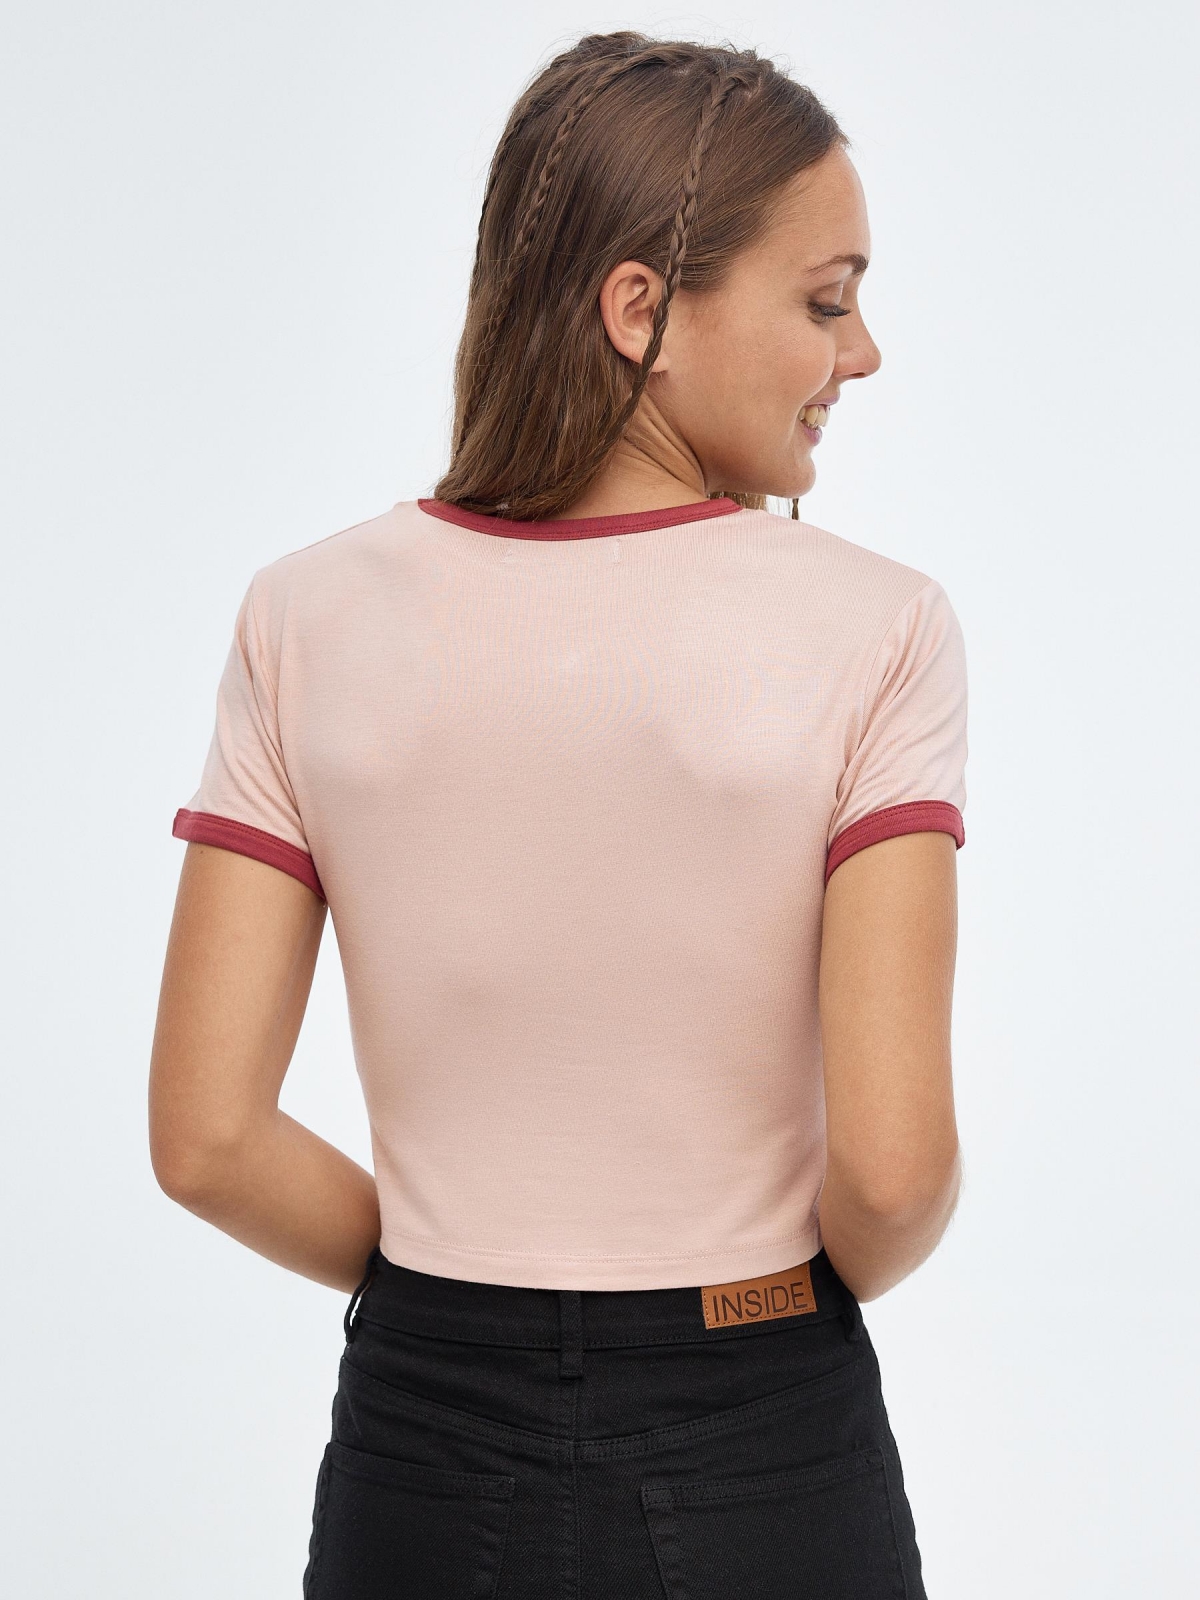 Embroidered crop top mauve middle back view